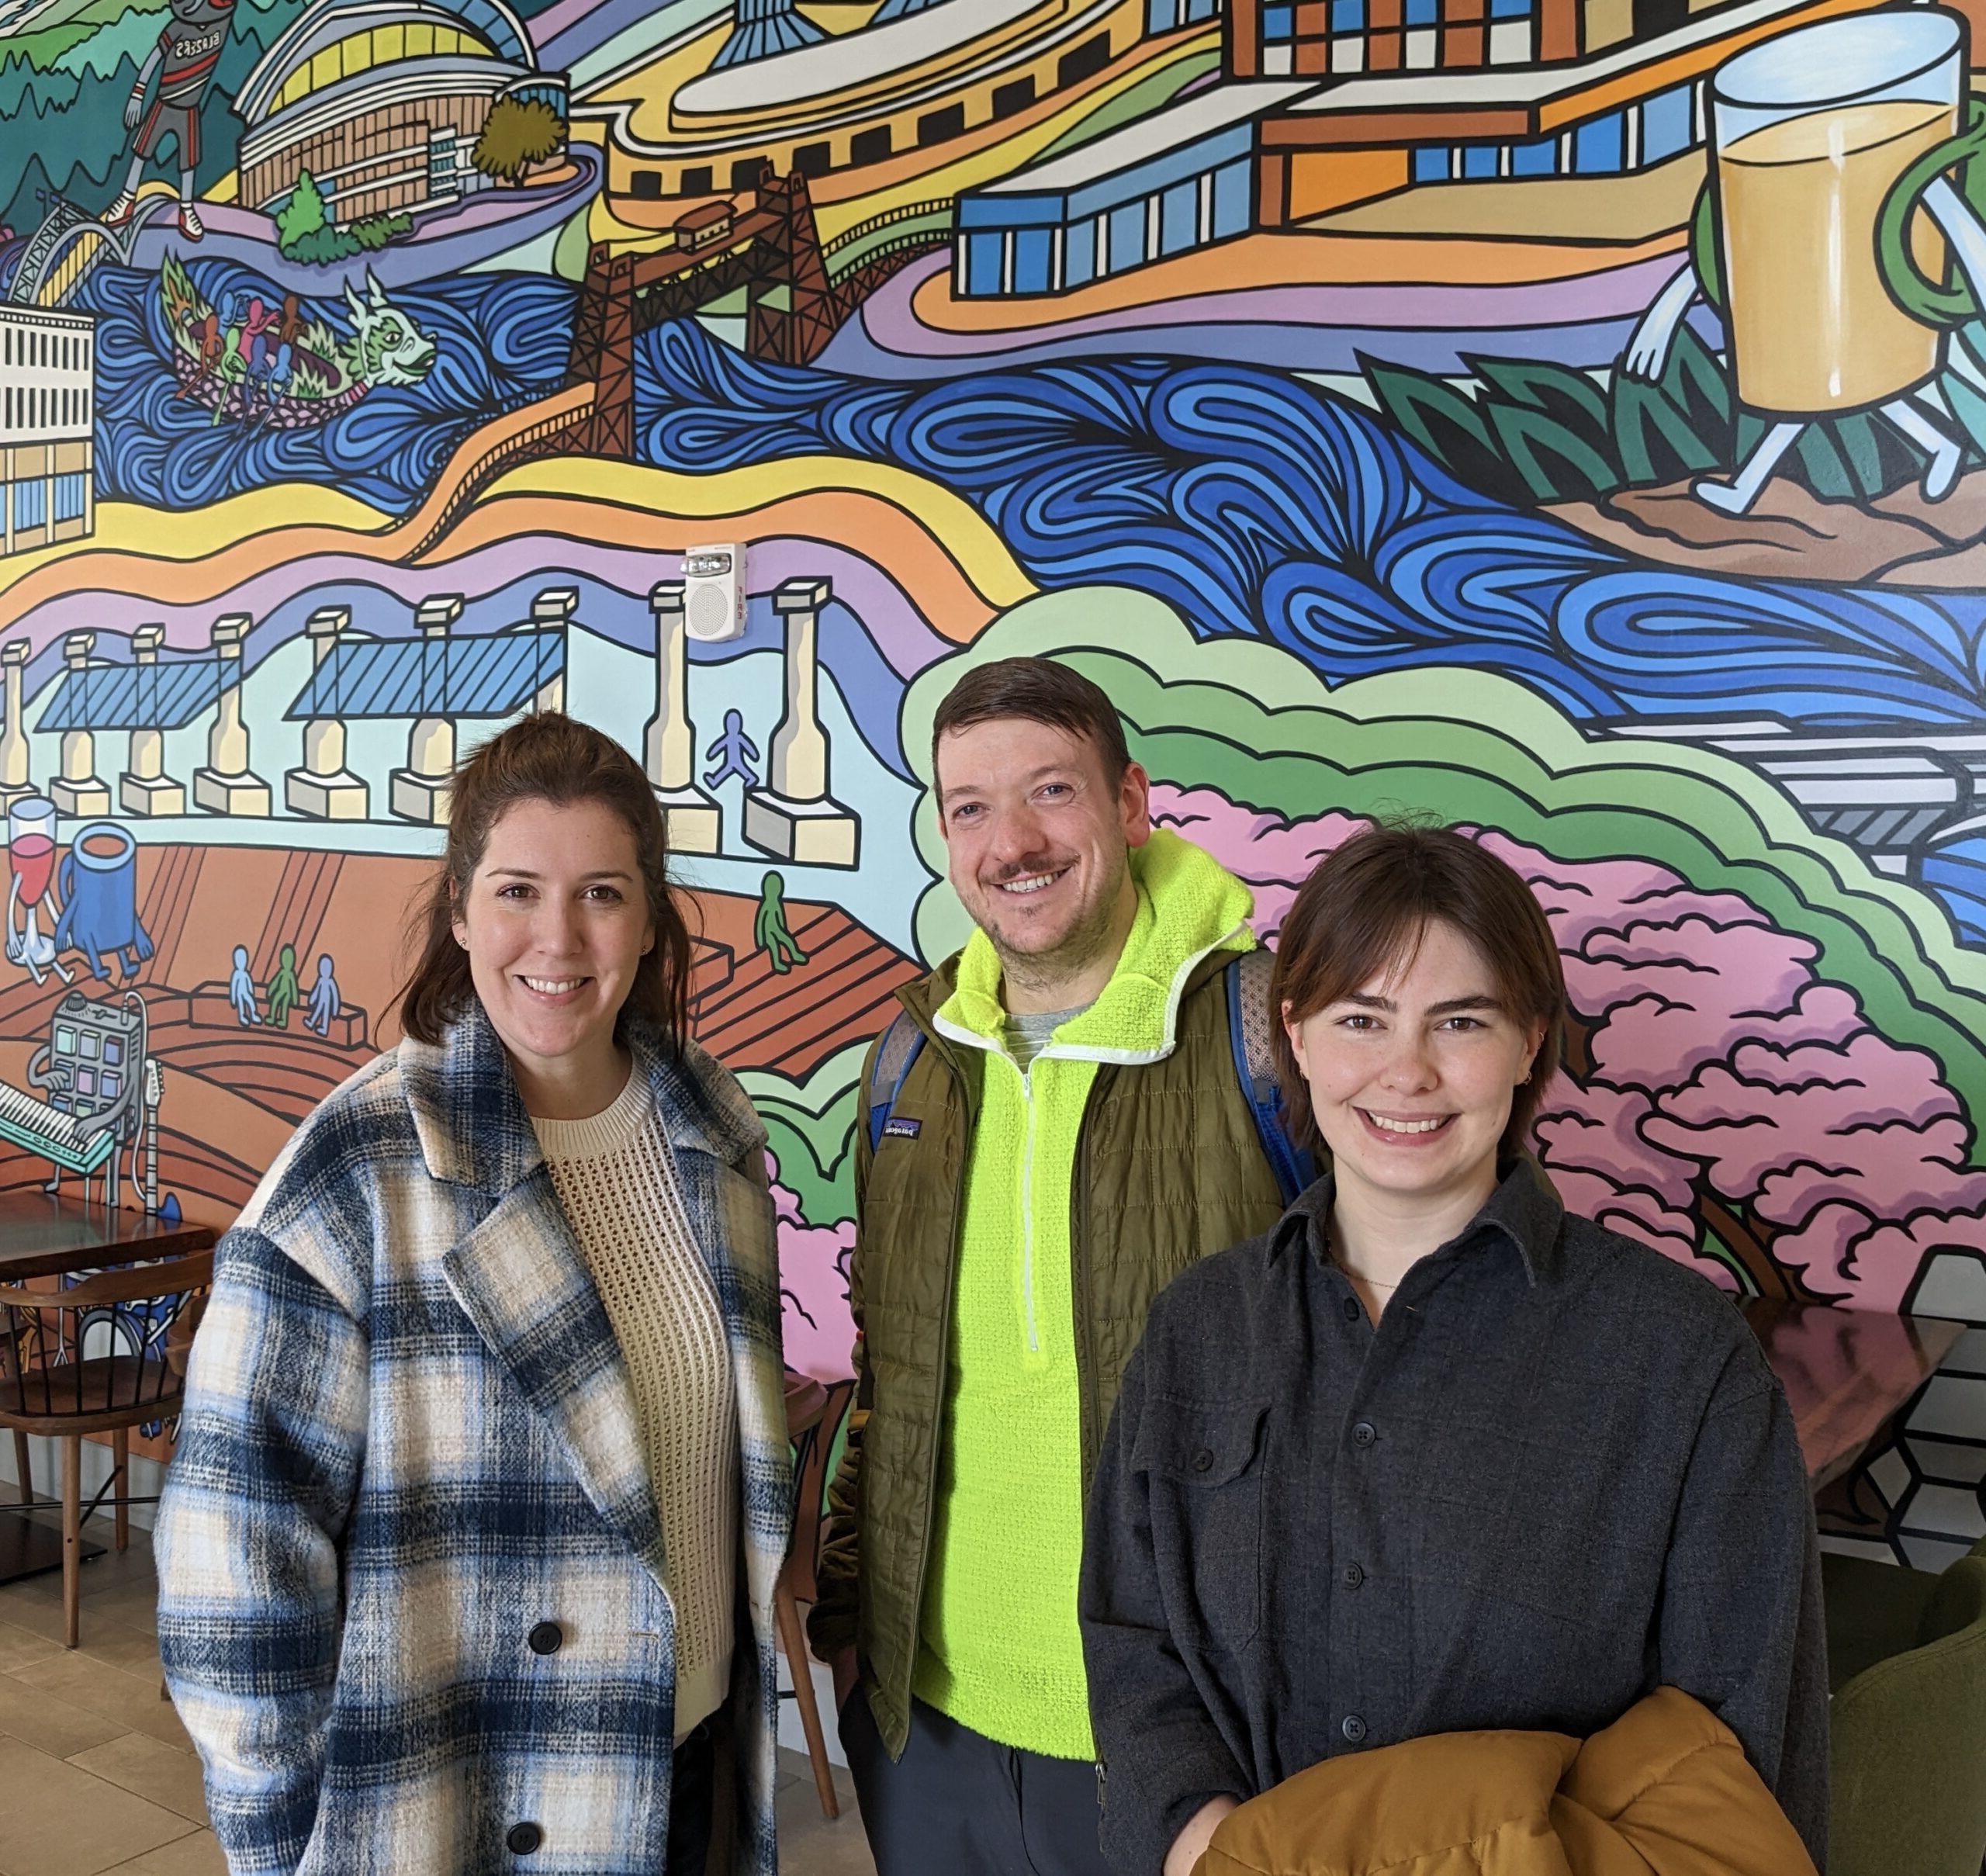 Three Lloyd EcoDistrict staff members stand in front of a colorful mural. From left to right: Kristin Leiber, Joshua Baker, and Burgin Utaski.